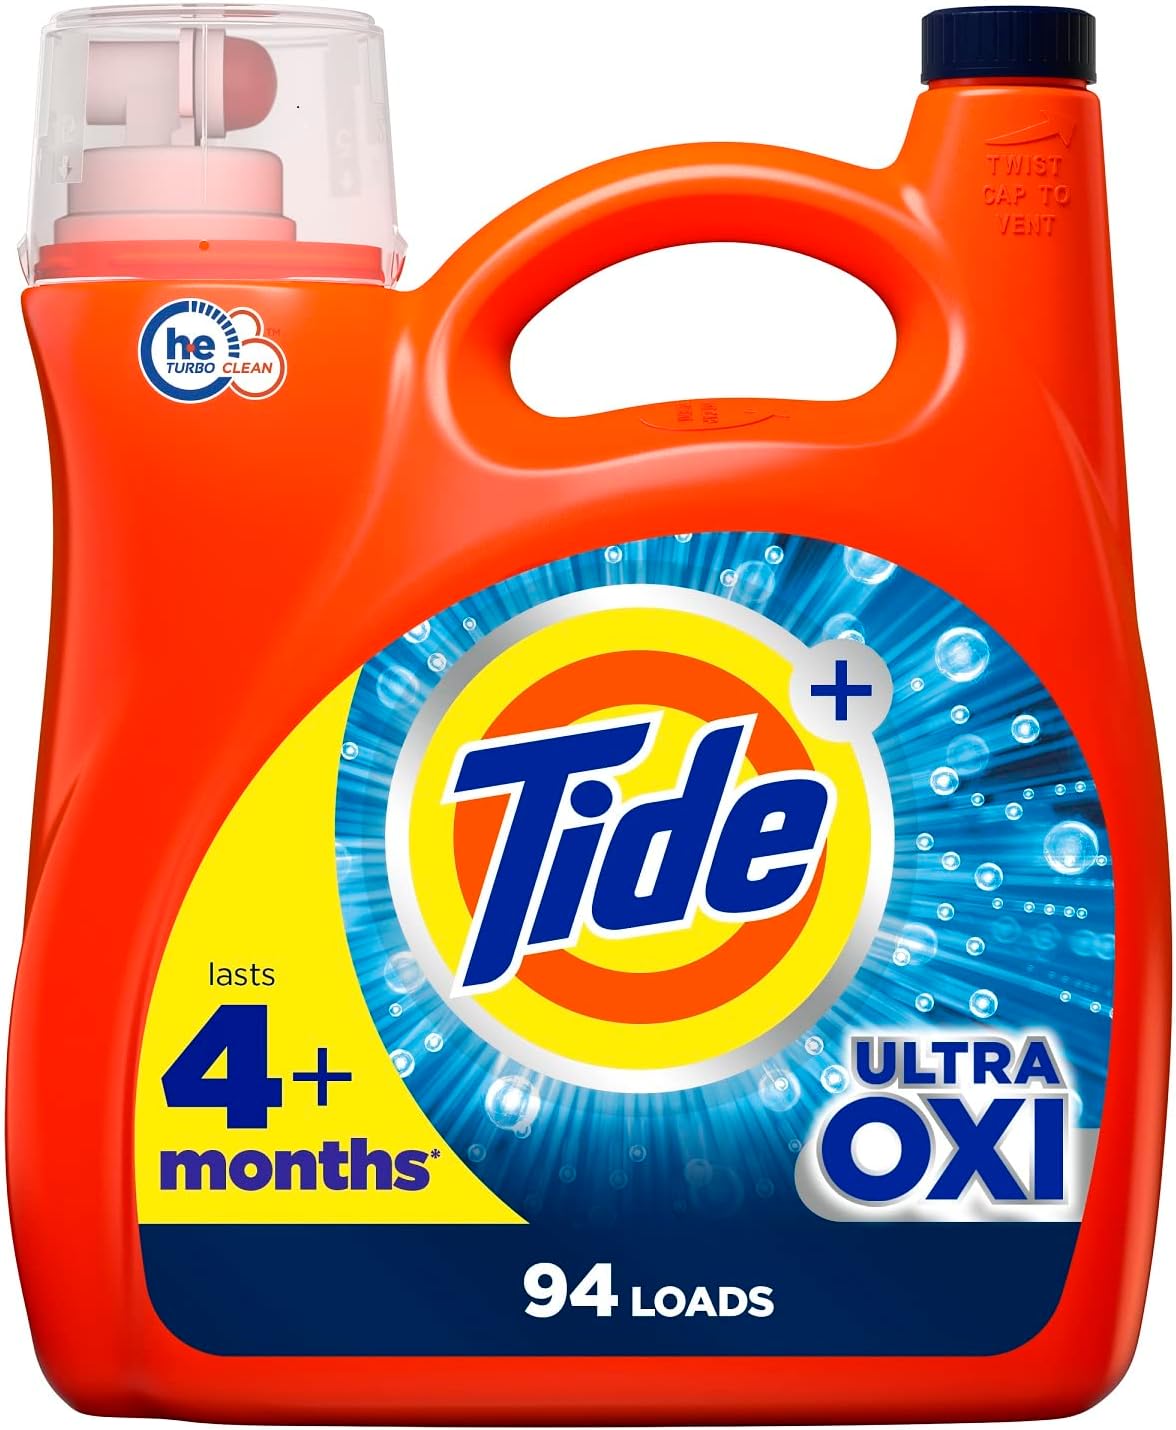 146-Oz Tide Liquid Laundry Detergent (Various) + $3.60 Amazon Credit $14.95 w/ Subscribe & Save